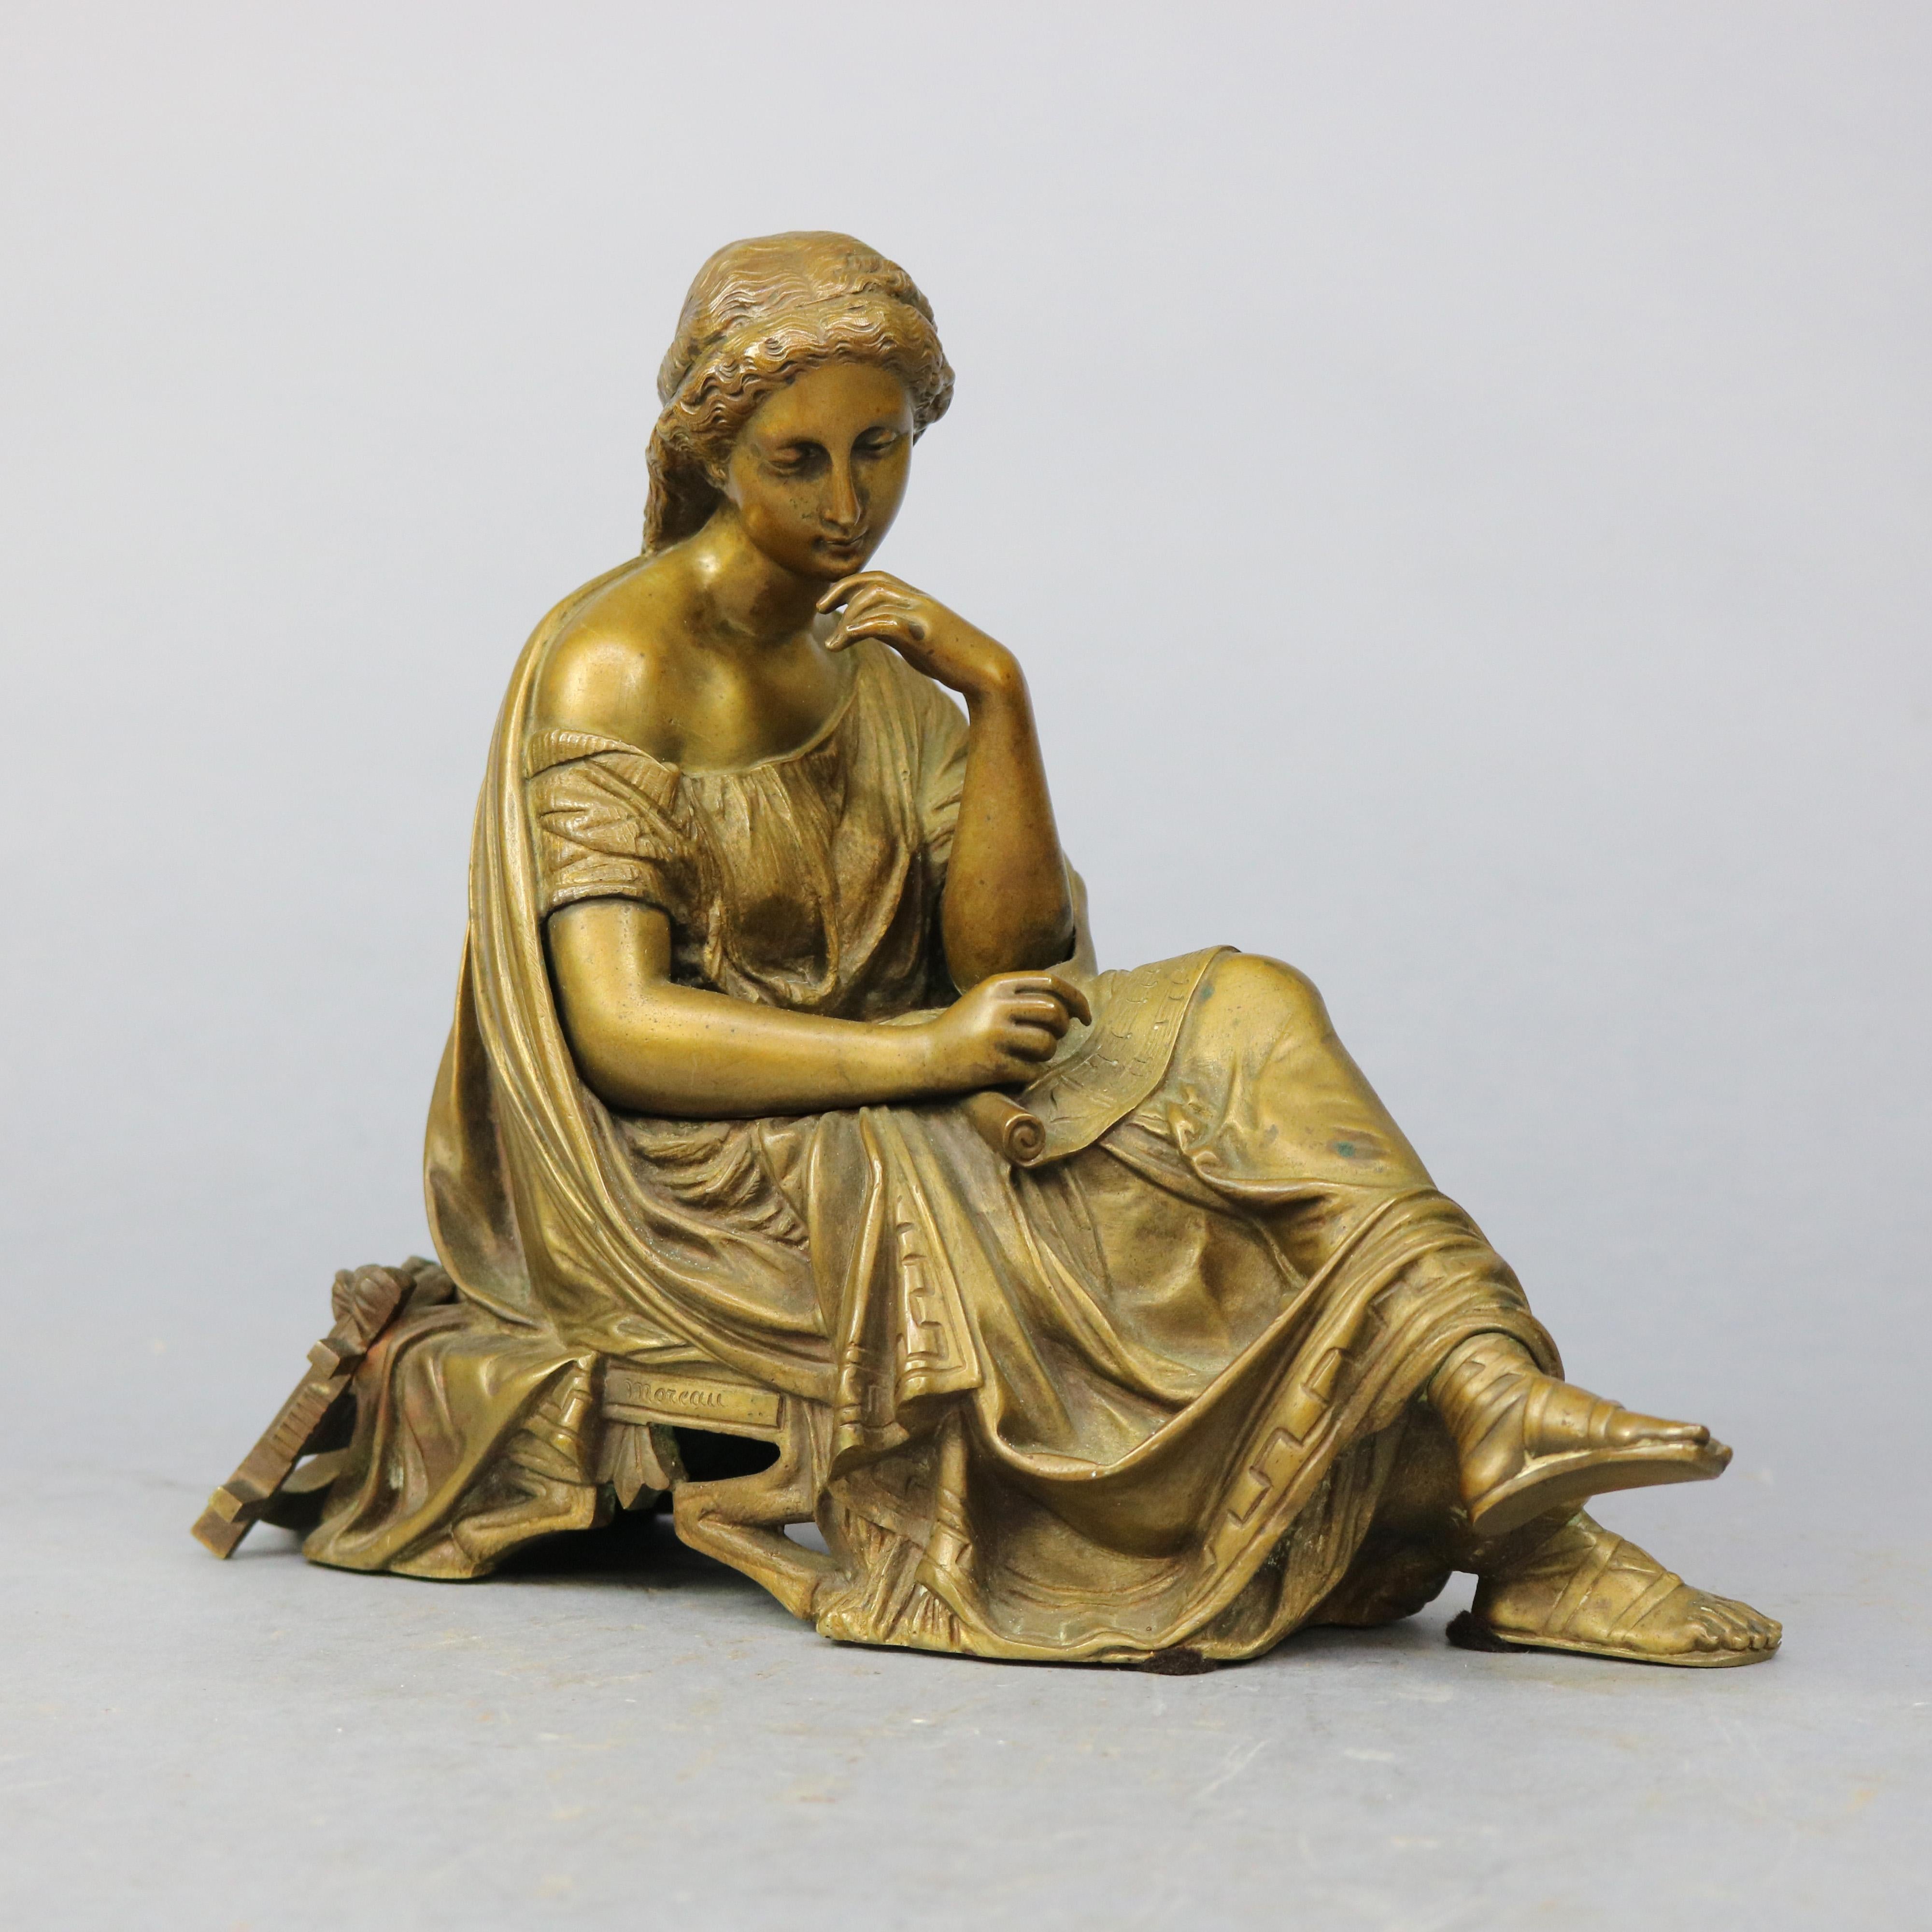 A sculpture after Moreau offers bronze cast of seated Classical woman composing music with lyre harp and scroll, stamped Moreau on seat as photographed, c1890

Measures- 8.25''H x 10.5''W x 3.75''D.